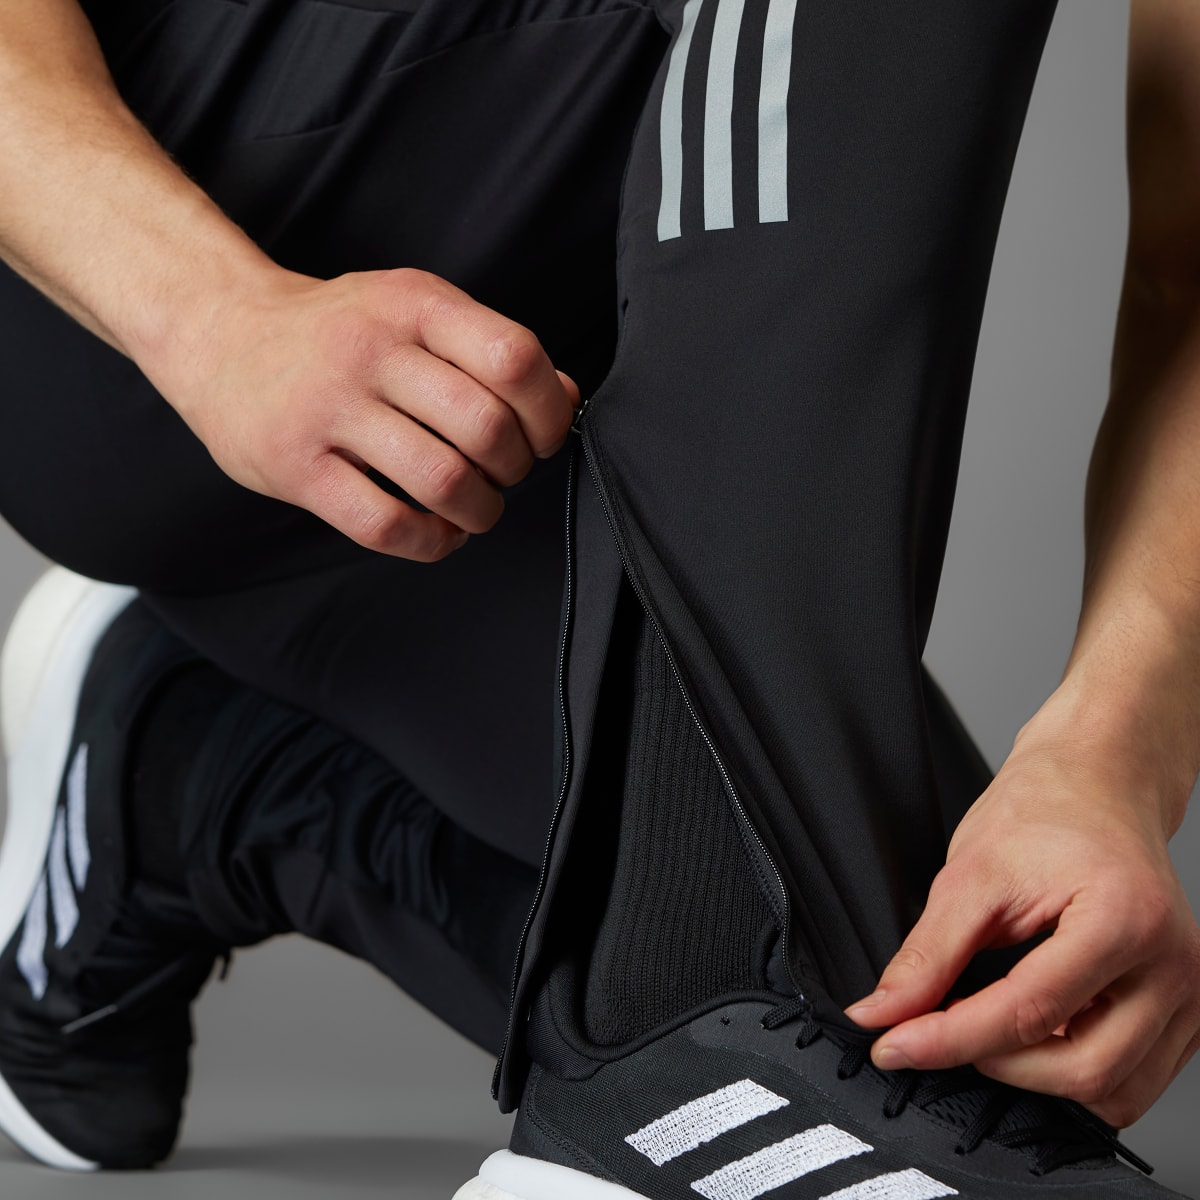 Adidas Own the Run Astro Knit Pants. 4